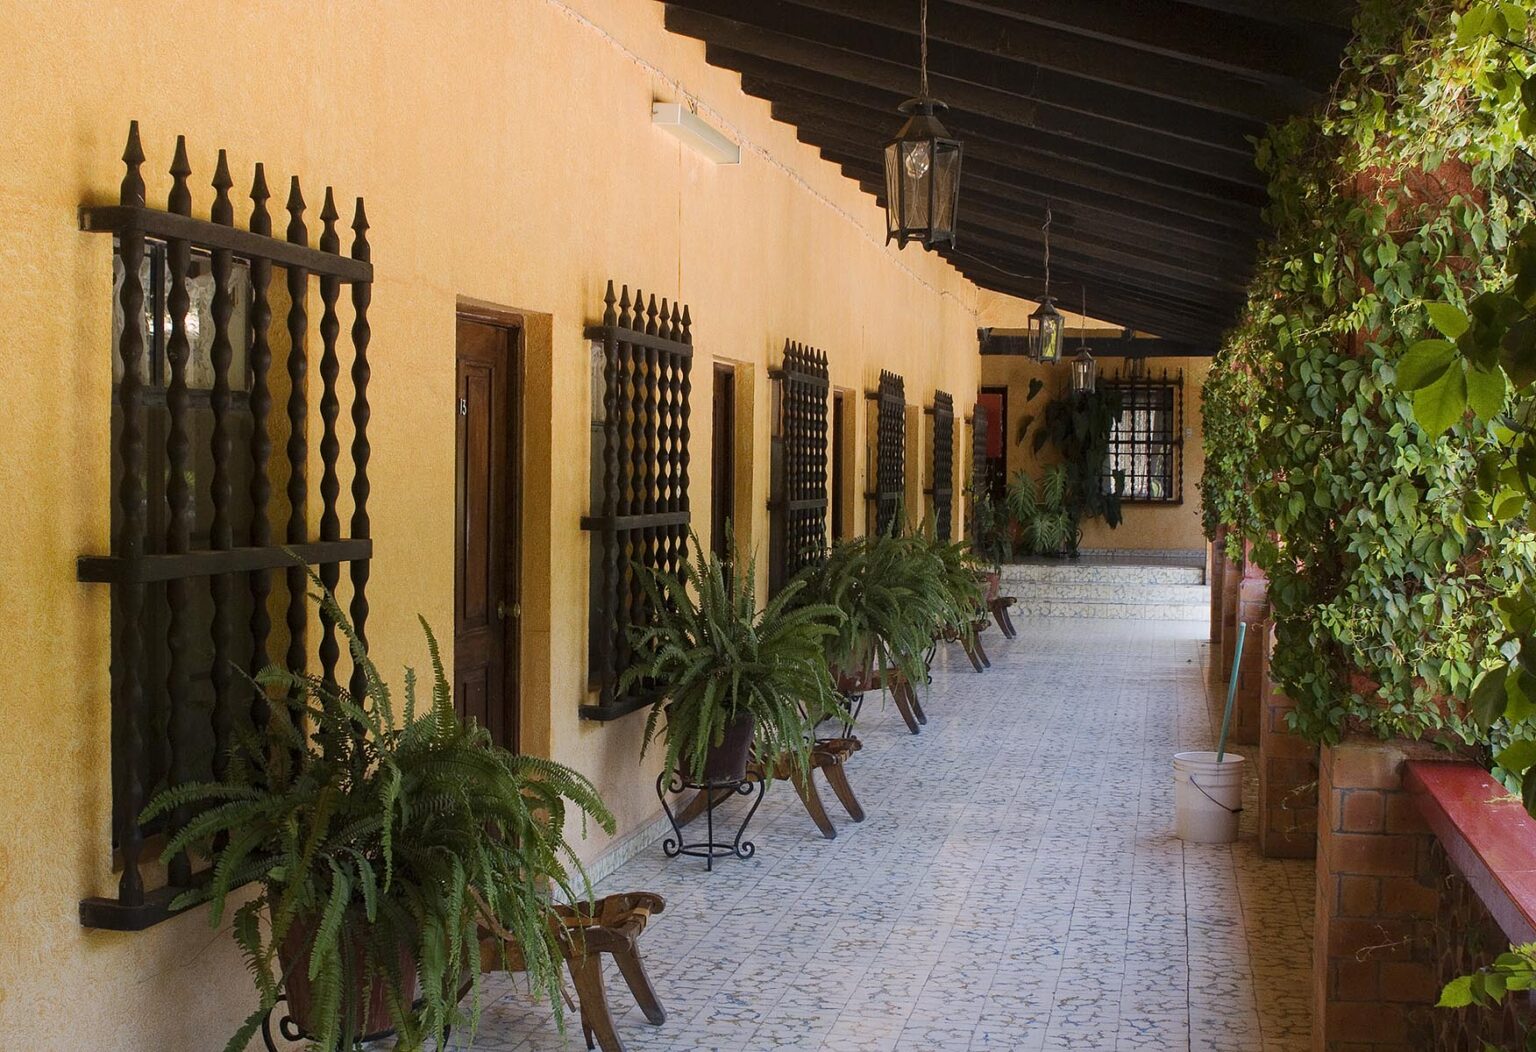 Wrought iron window grates wooden doorways and a covered walkway create the Mexican style of this hotel in SAN MIGUEL DE ALLENDE - MEXICO